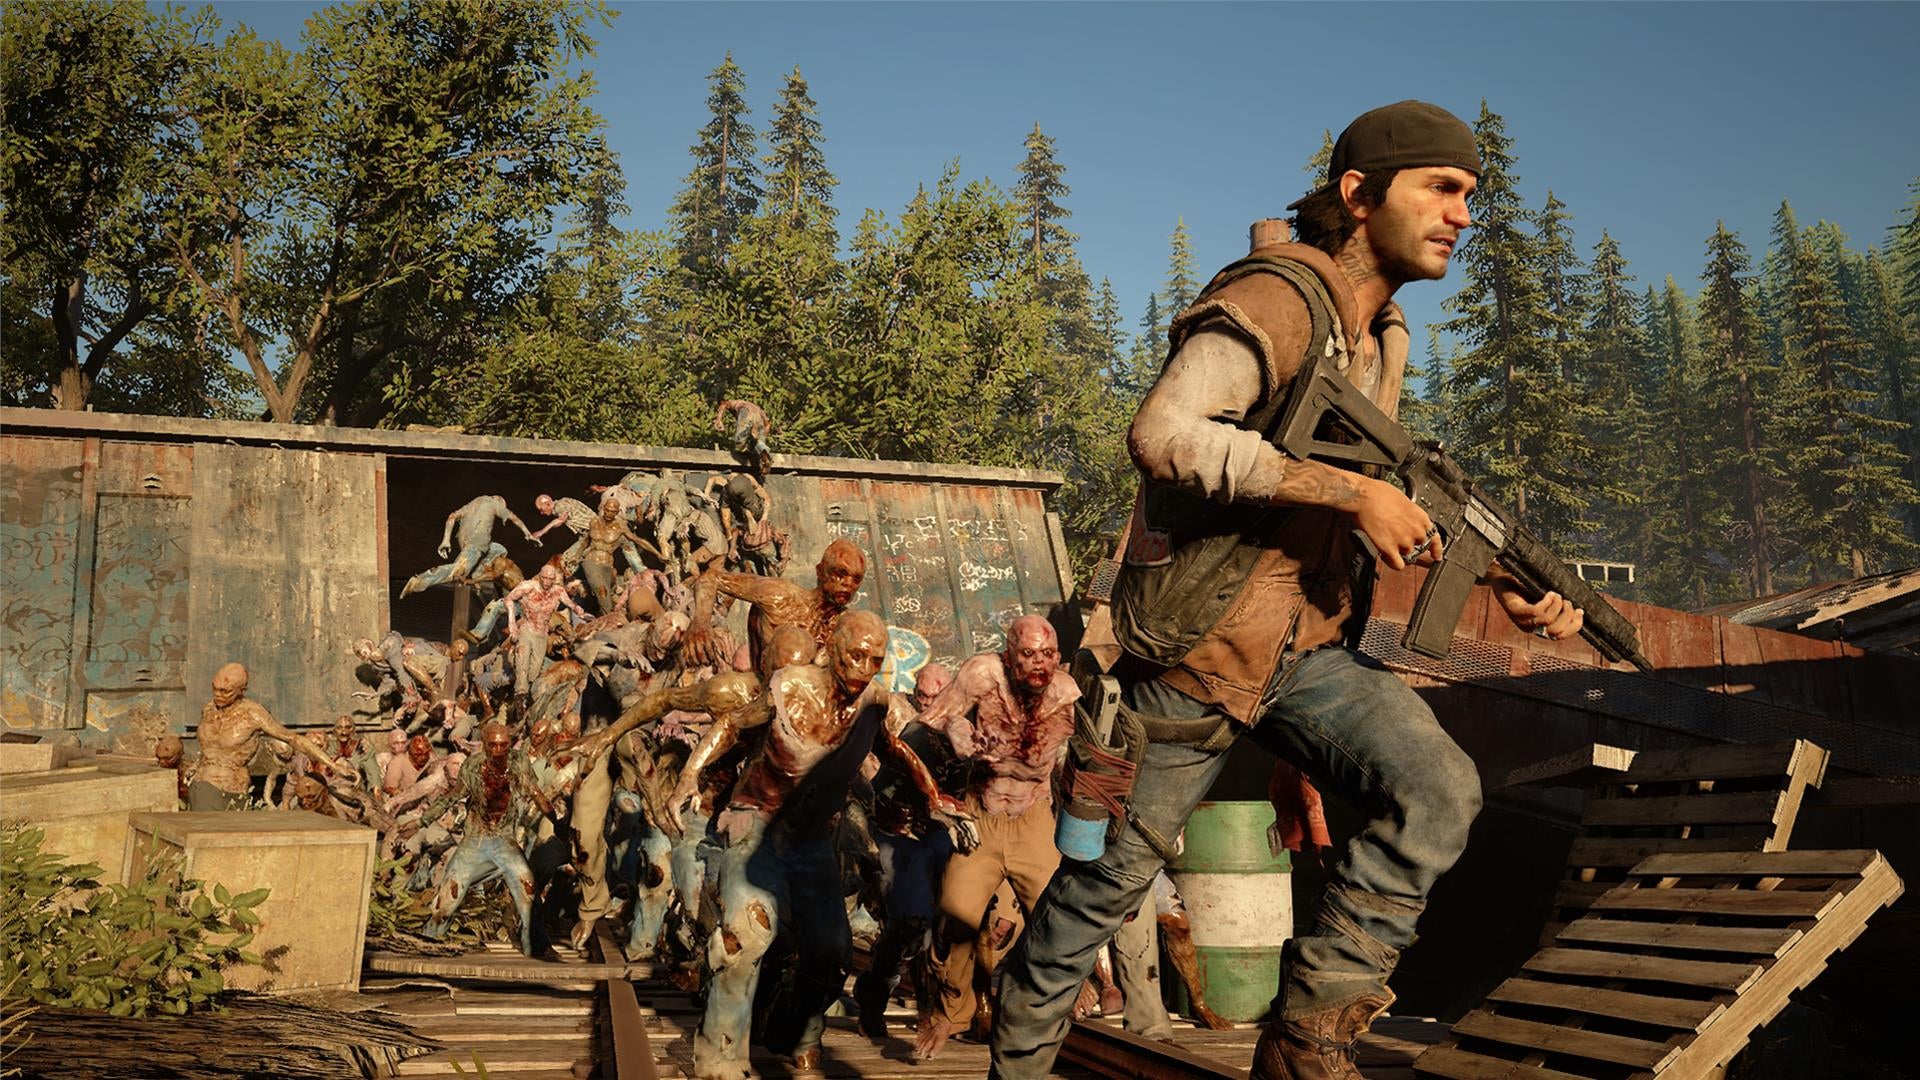 Image for Days Gone PS4 Pro E3 2017 Gameplay